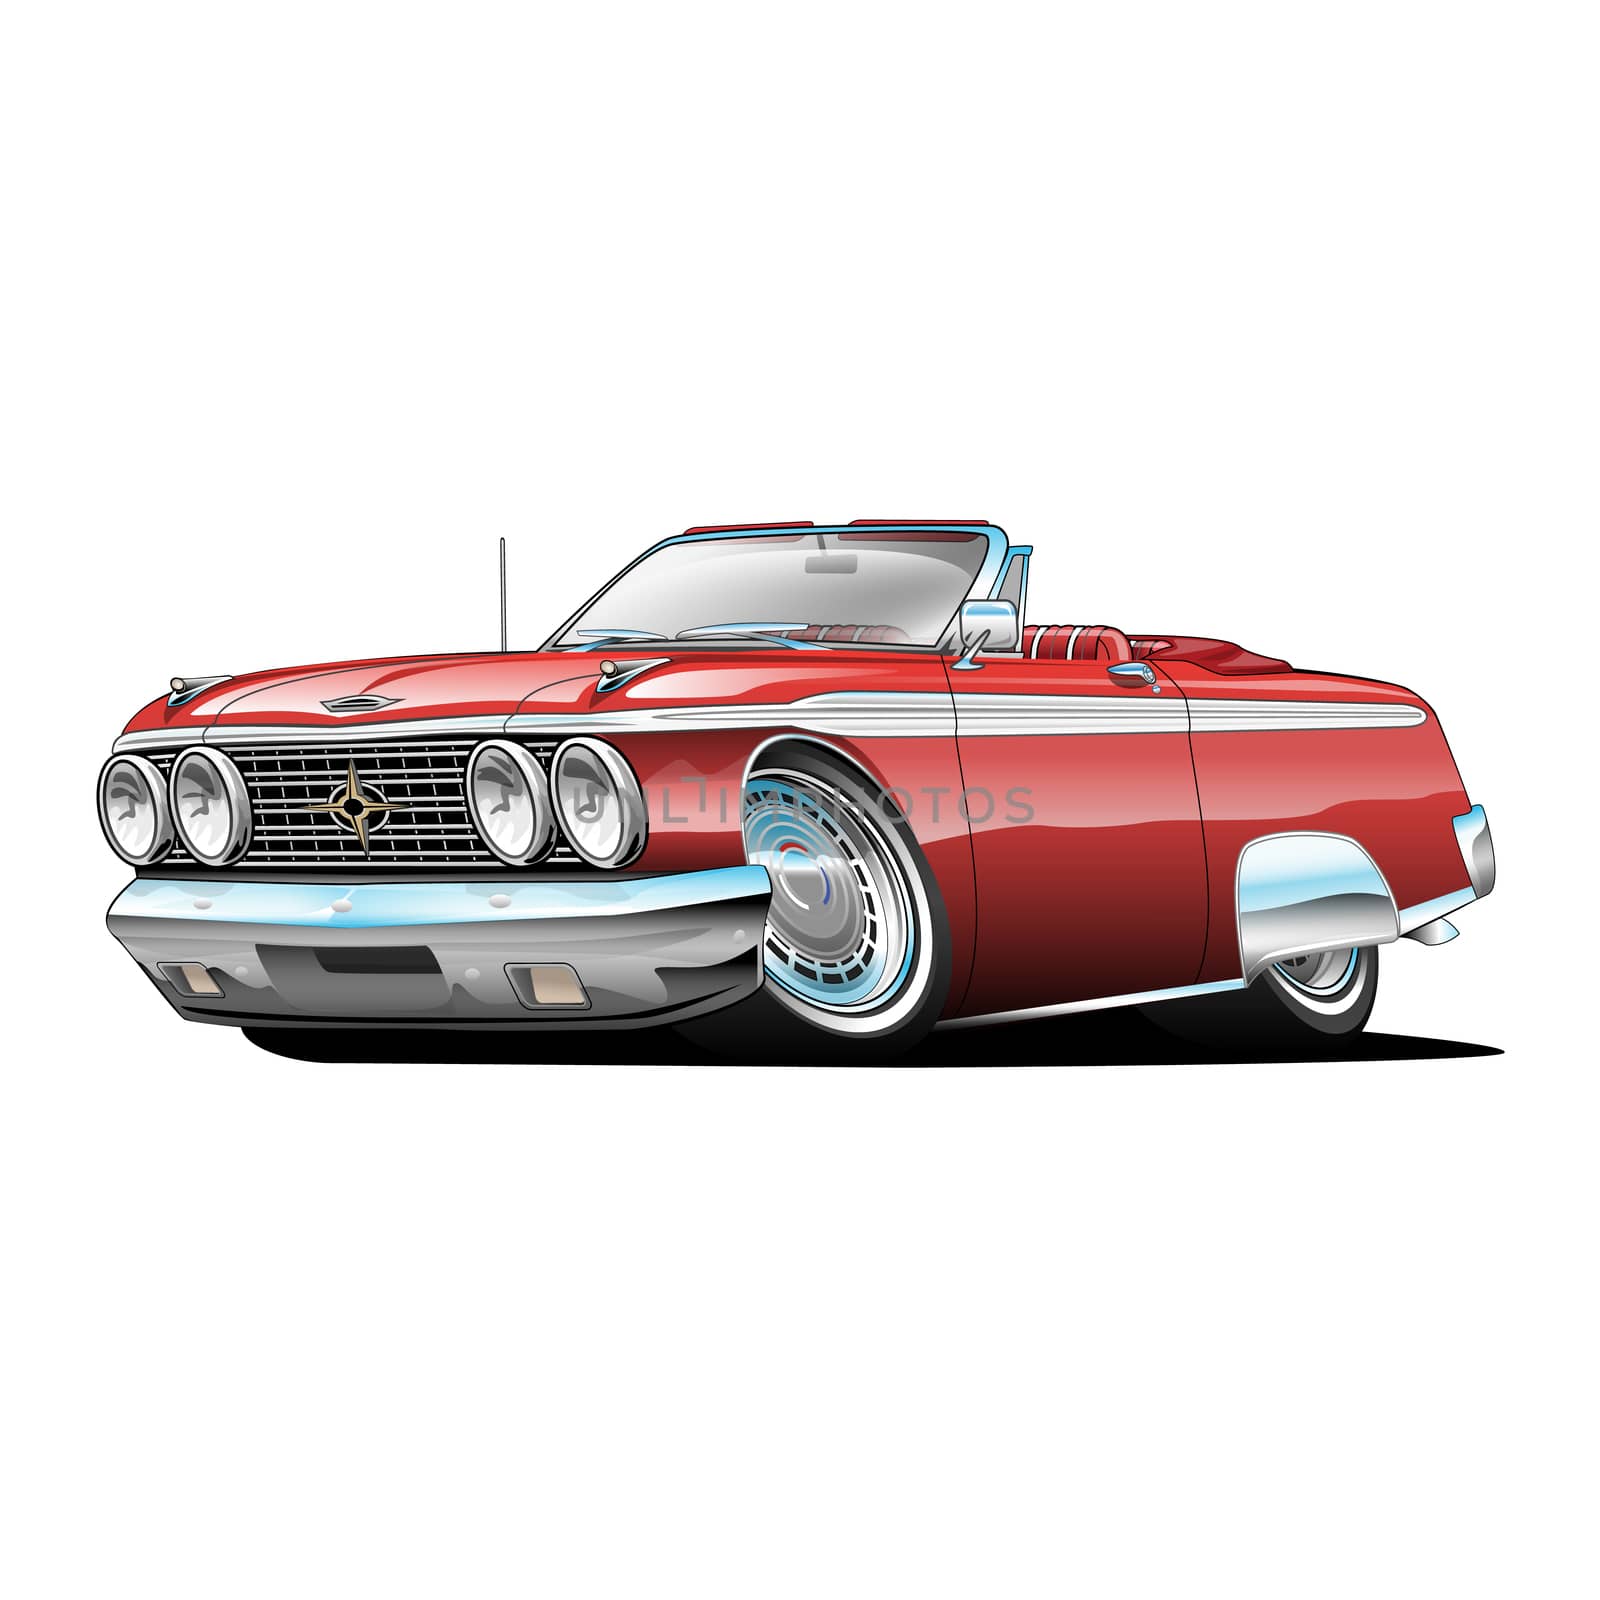 Hot American convertible vintage car cartoon. Red, lots of chrome, aggressive stance, low profile, big tires and rims.